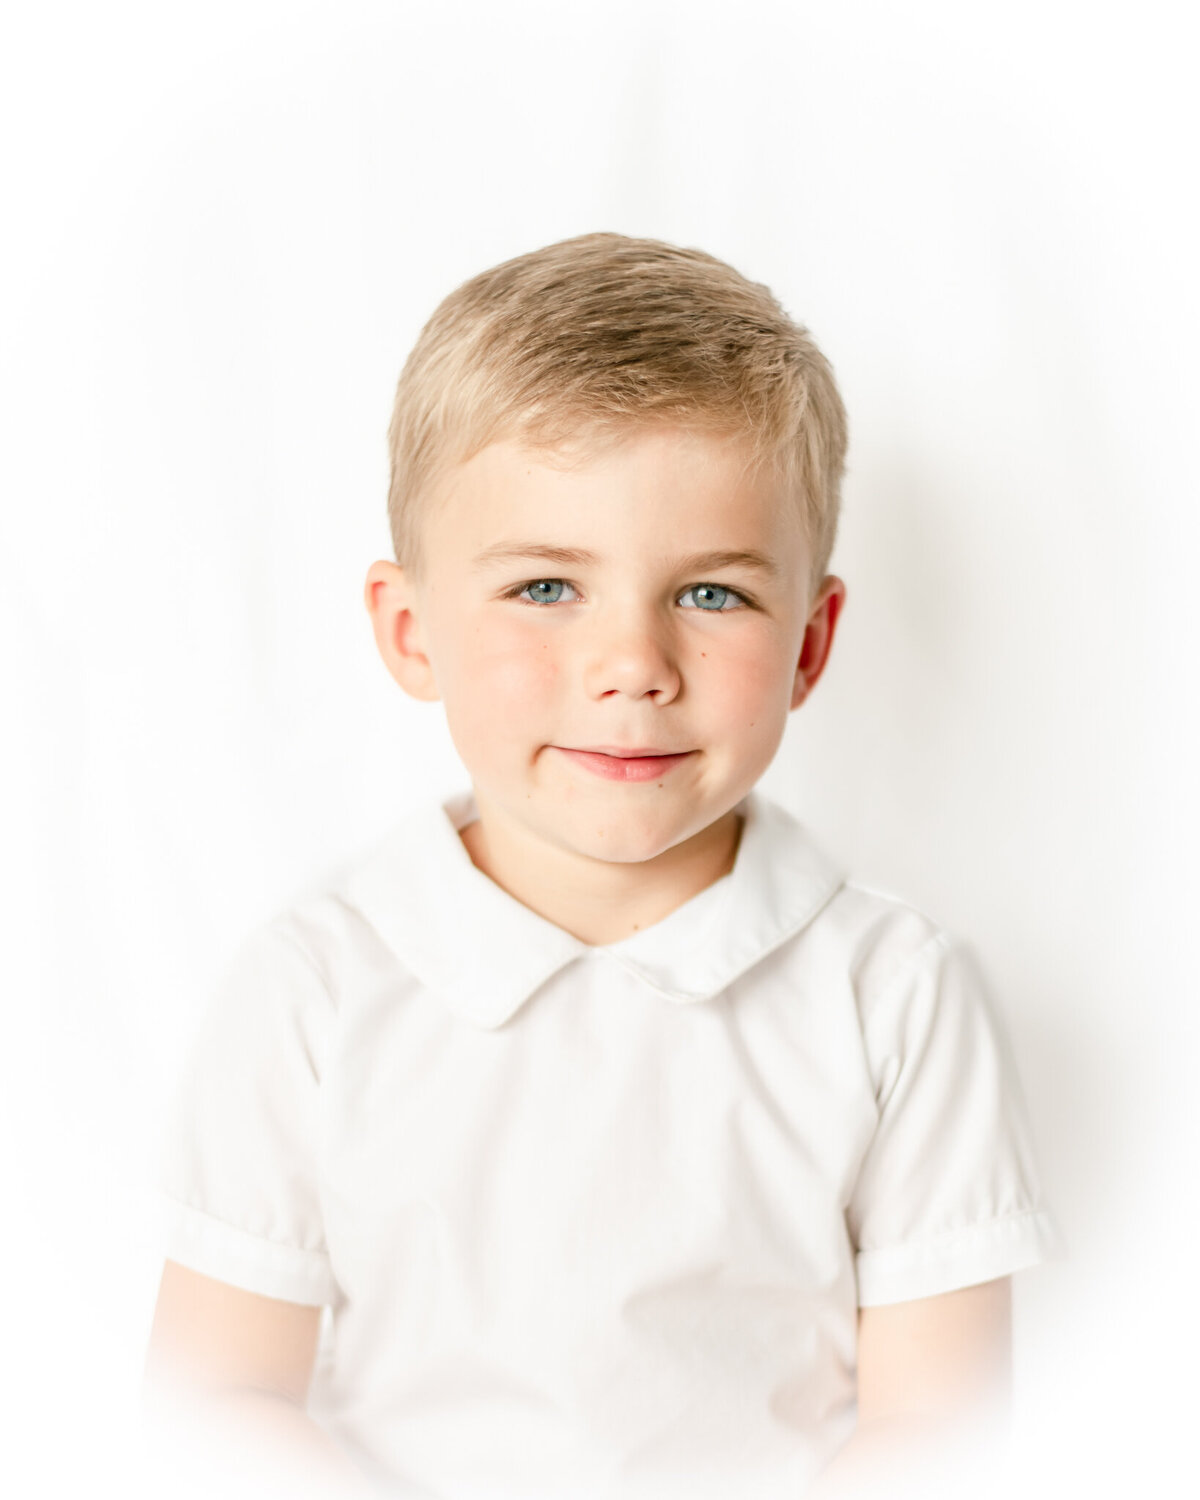 Vignetted photo of a blonde boy smiling